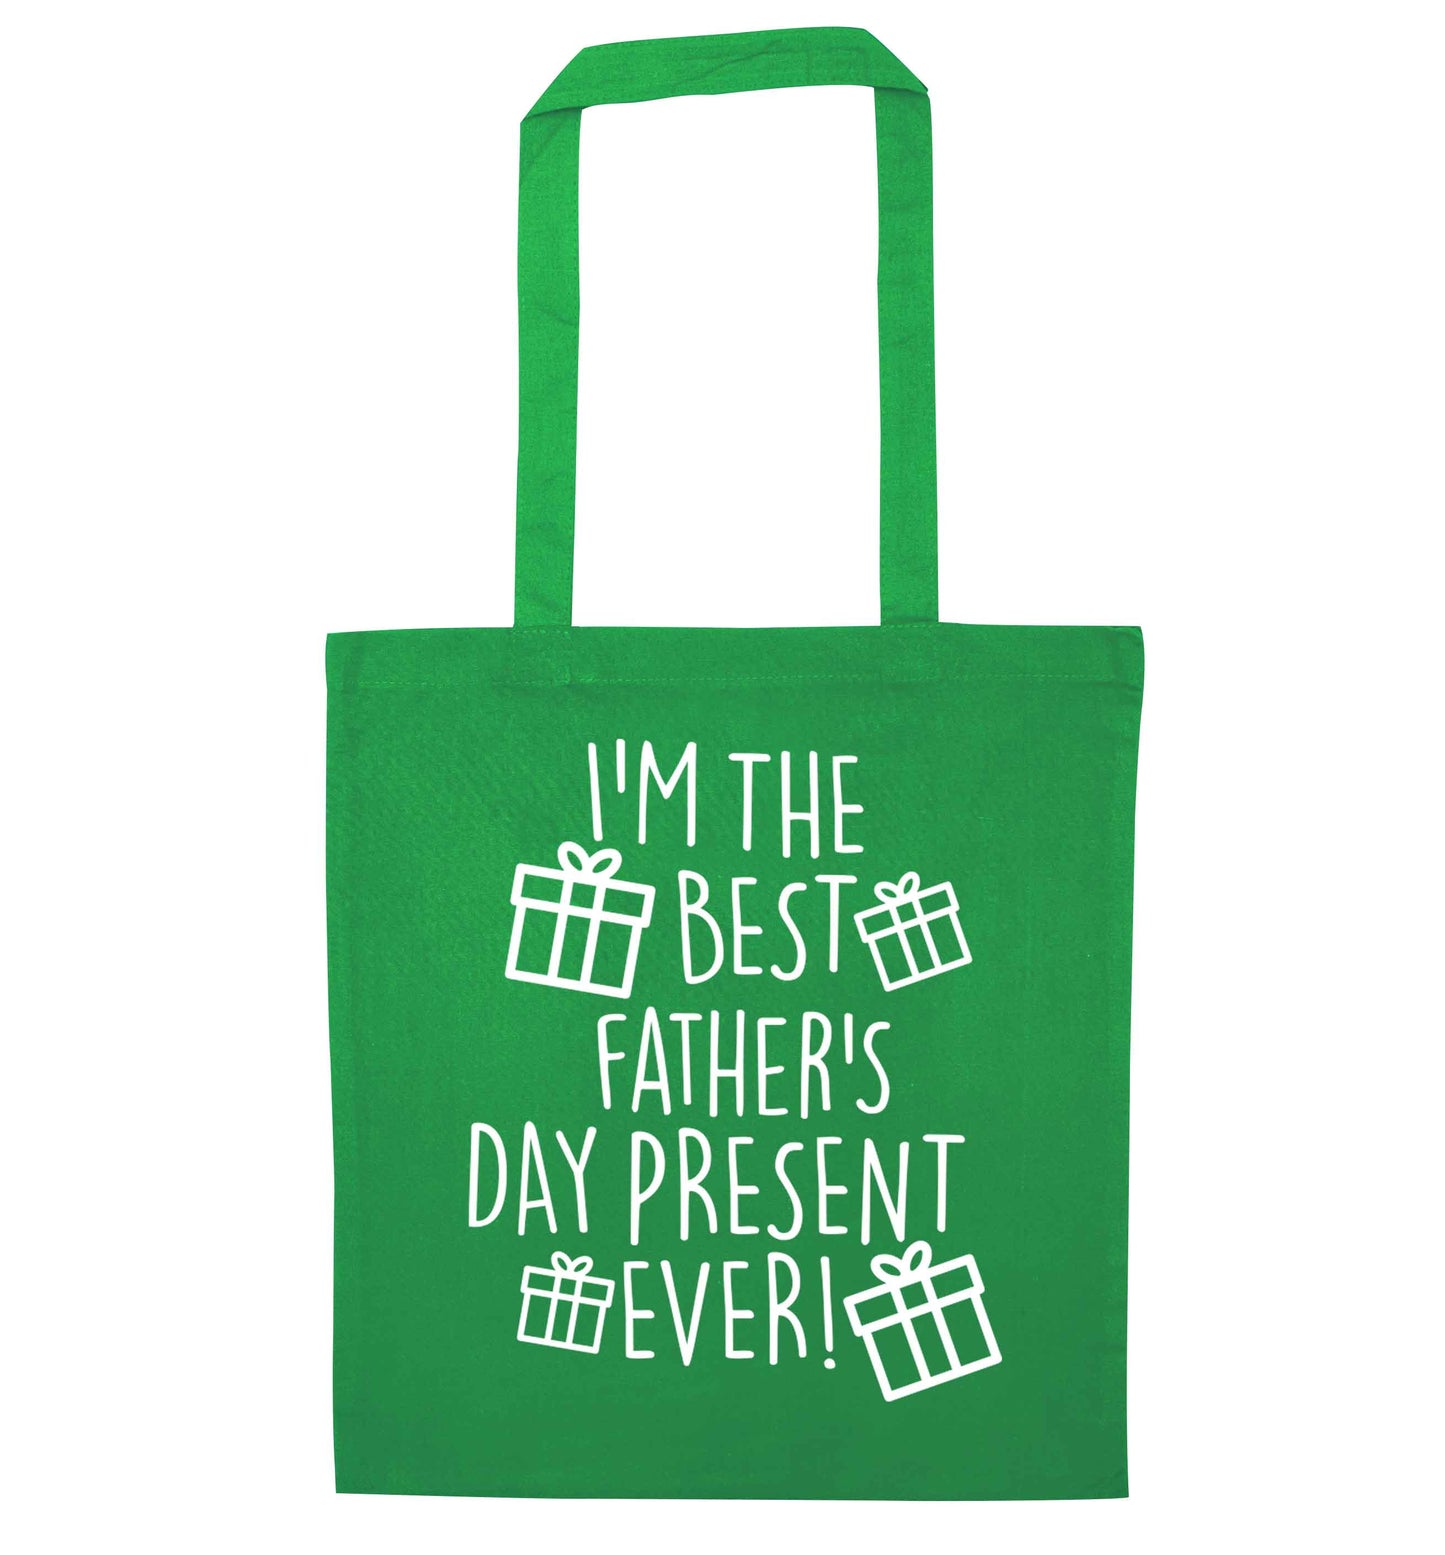 I'm the best father's day present ever!| Tote Bag